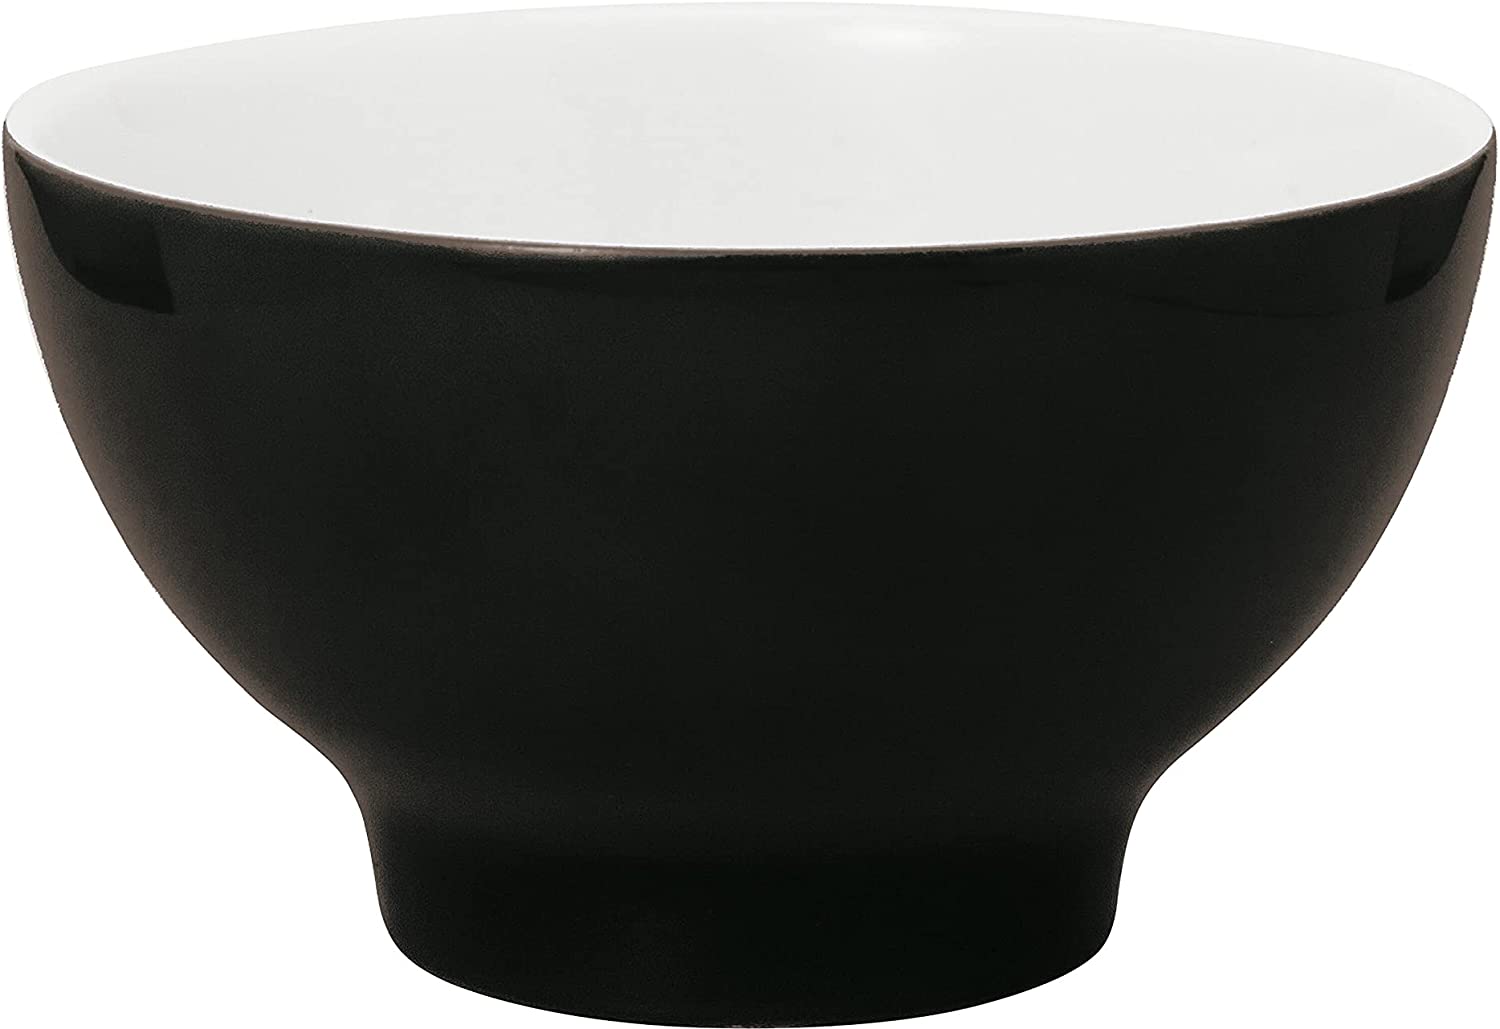 KAHLA Pronto Colore Bowl in Original Packaging